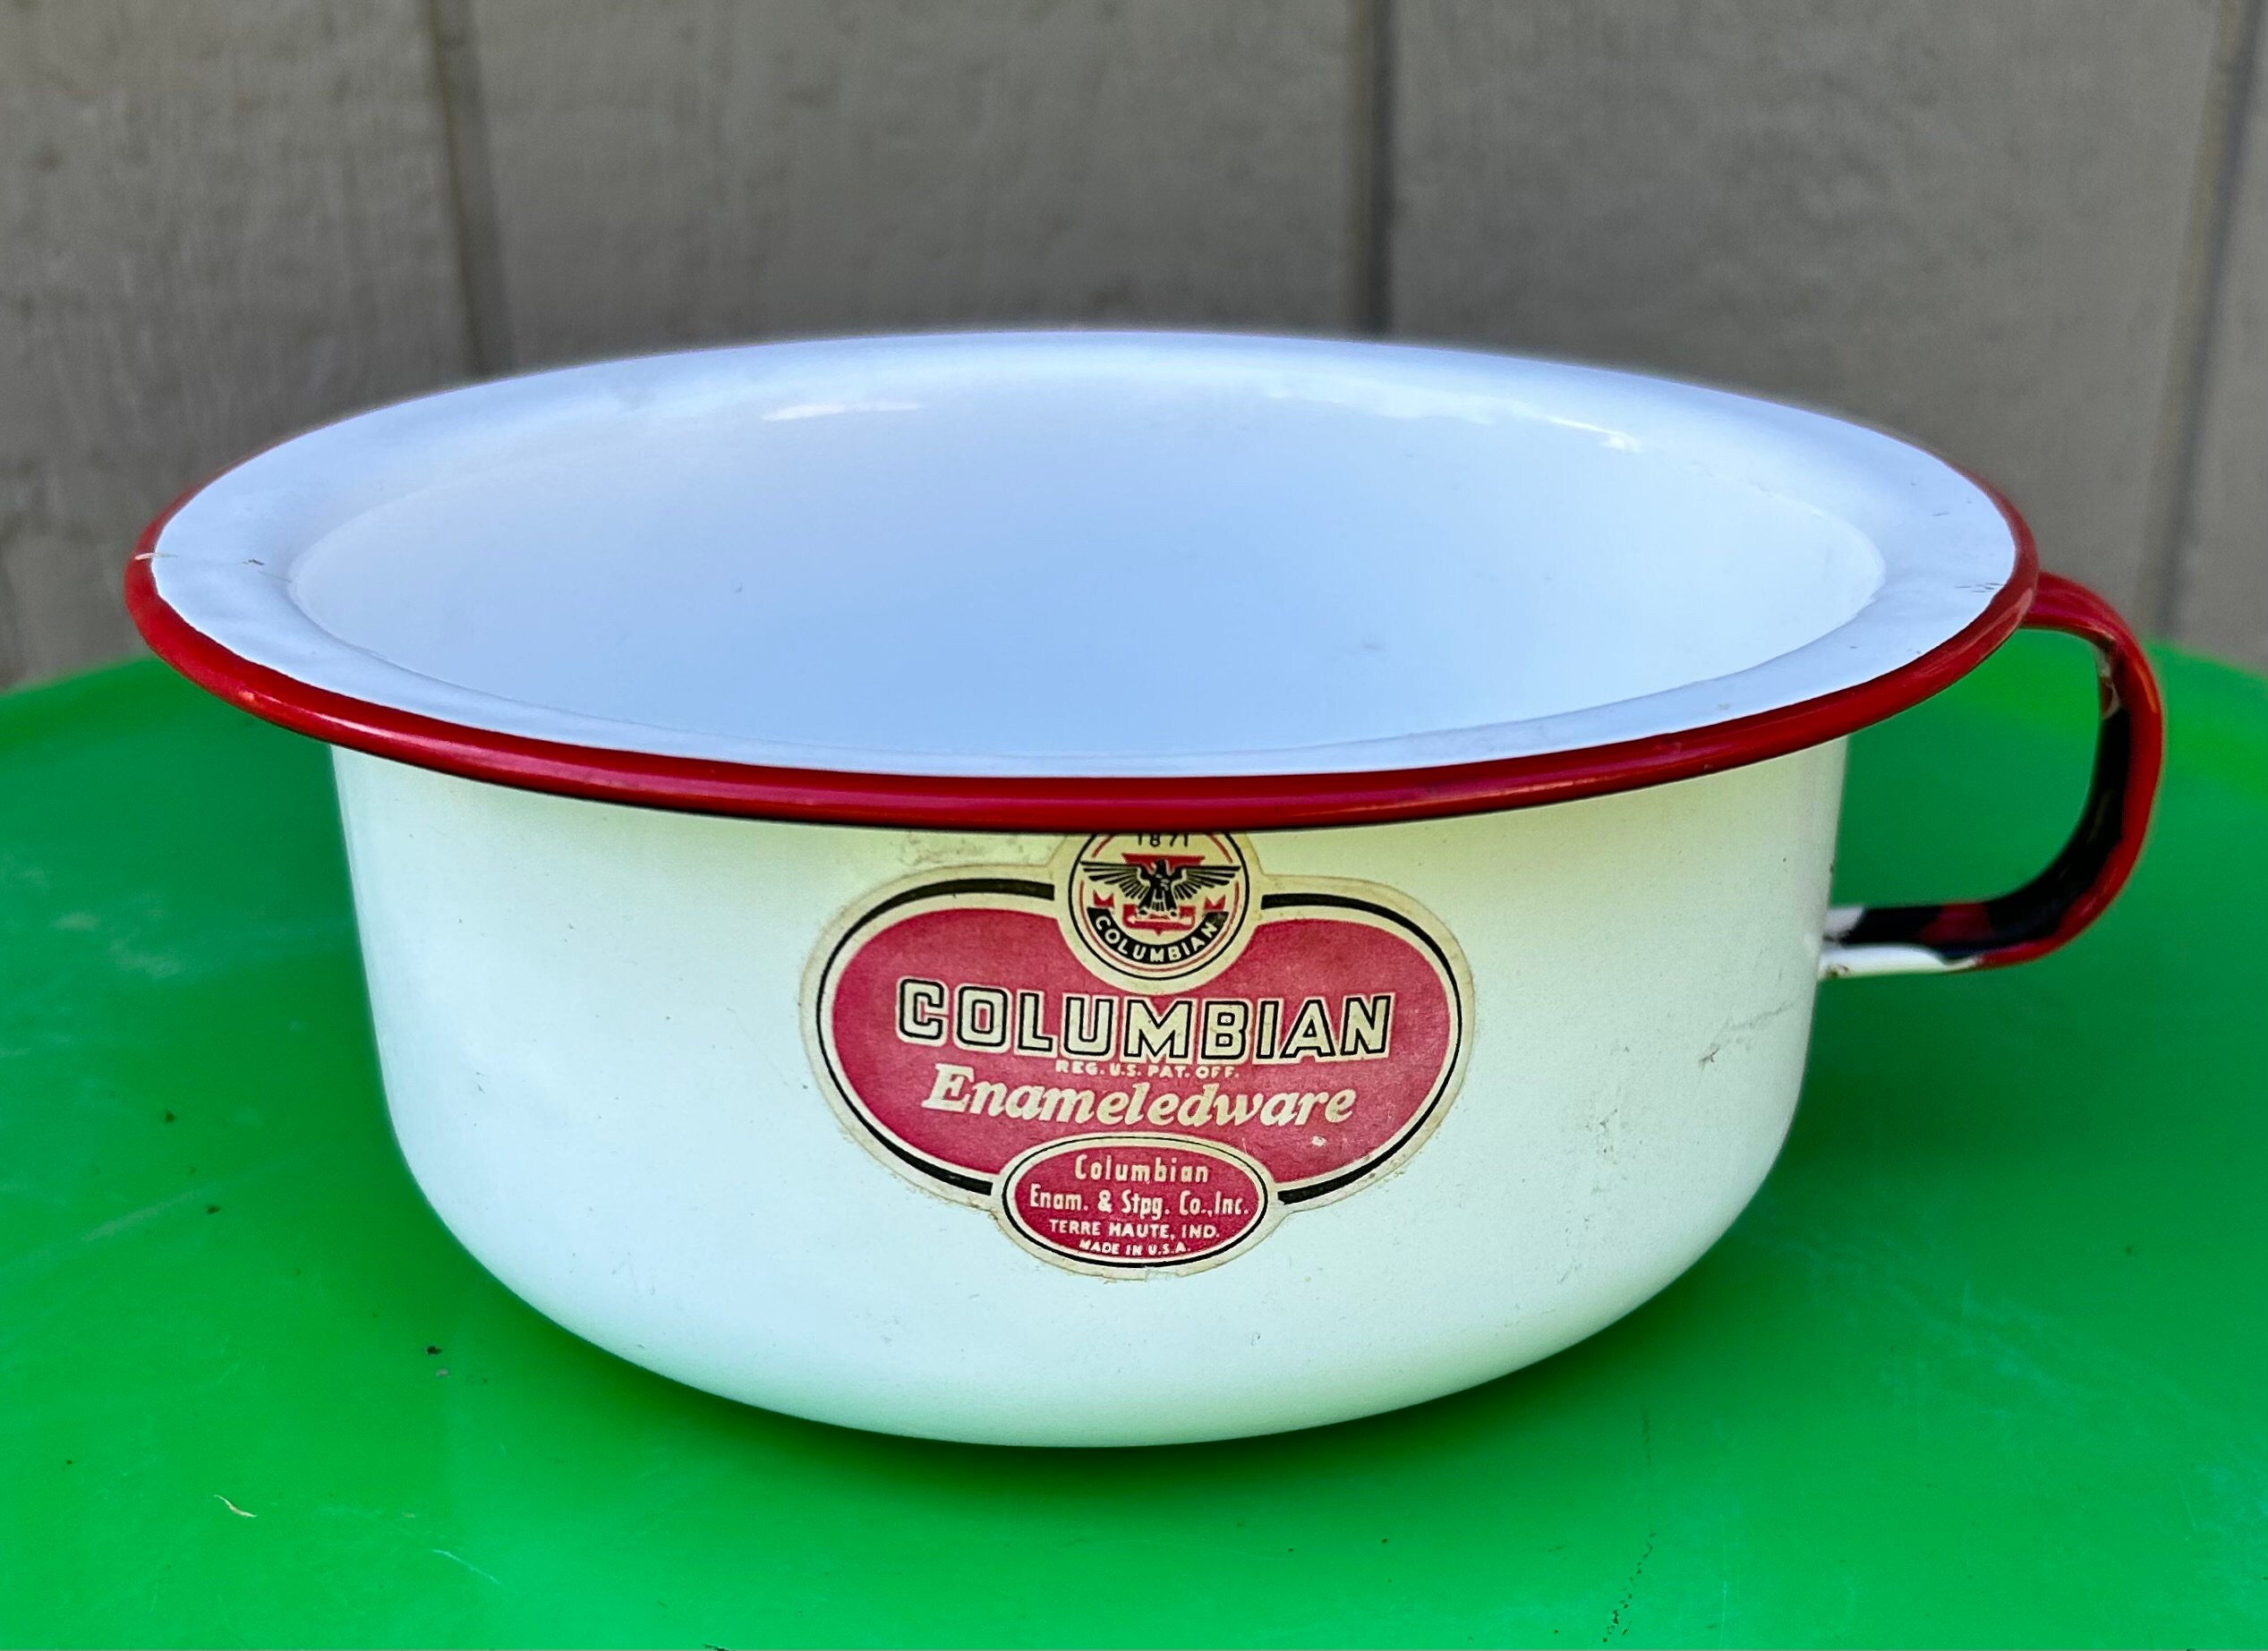 Vintage French Deep 2 Handled Beige Enameled Metal Cooking Pan With Lid,  Retro Enemelware Kitchen Decor From France, Enamel Cook Pot 